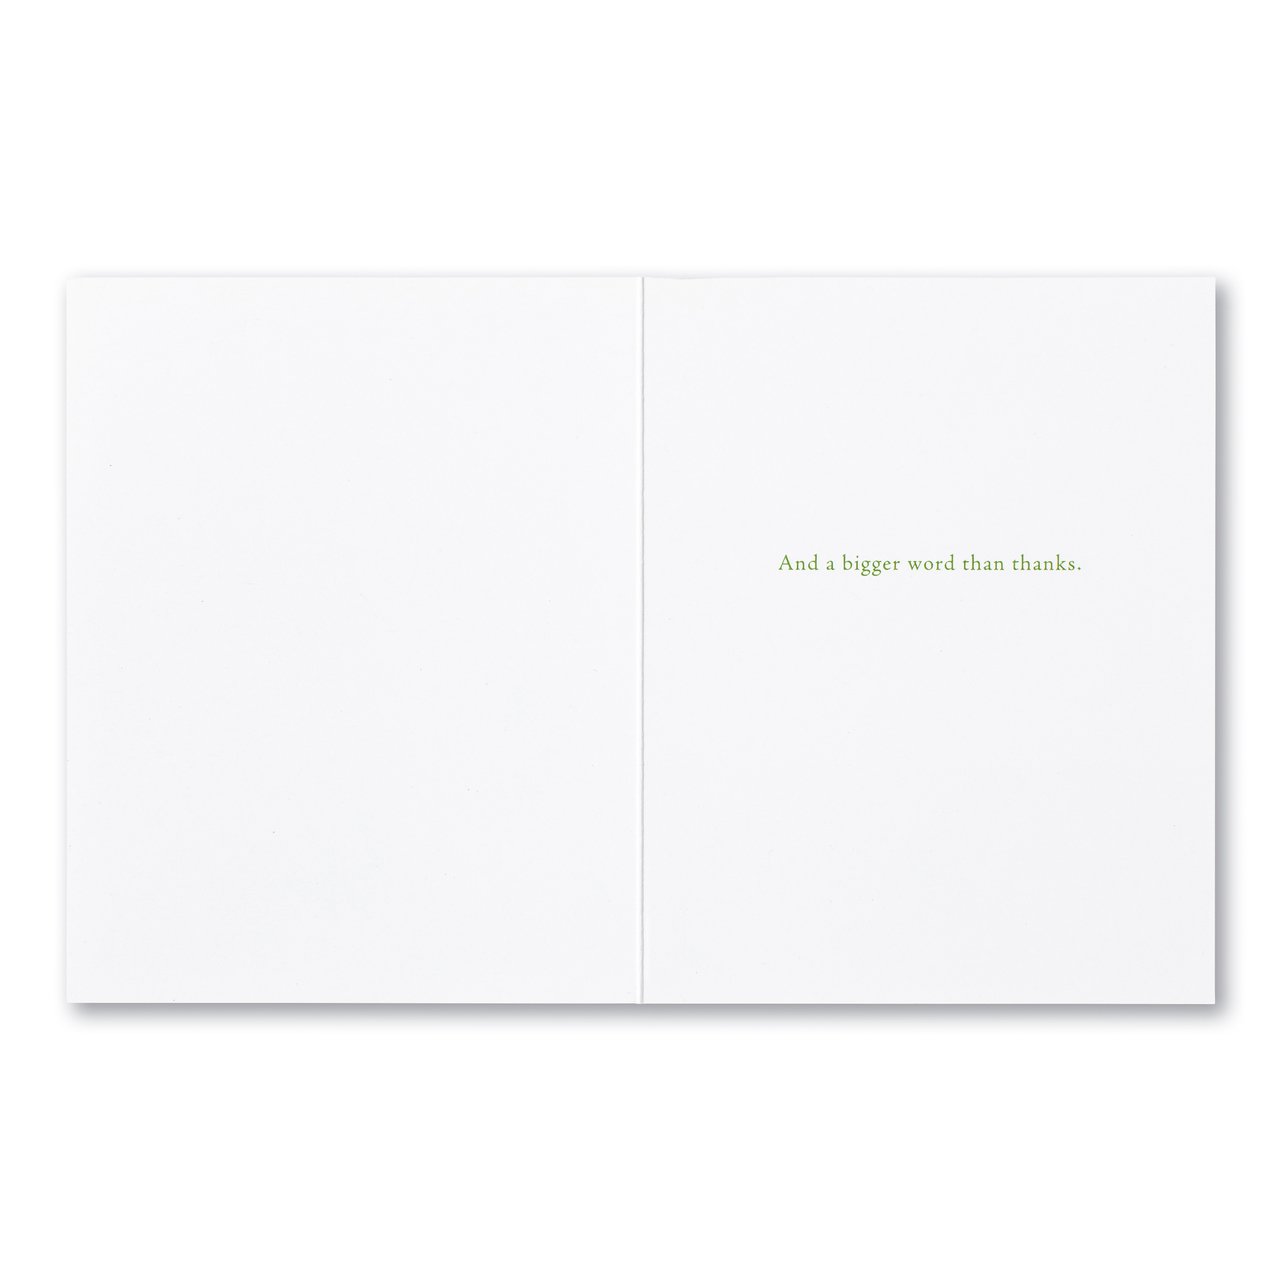 I Want a Brighter Word Than Bright Greeting Card